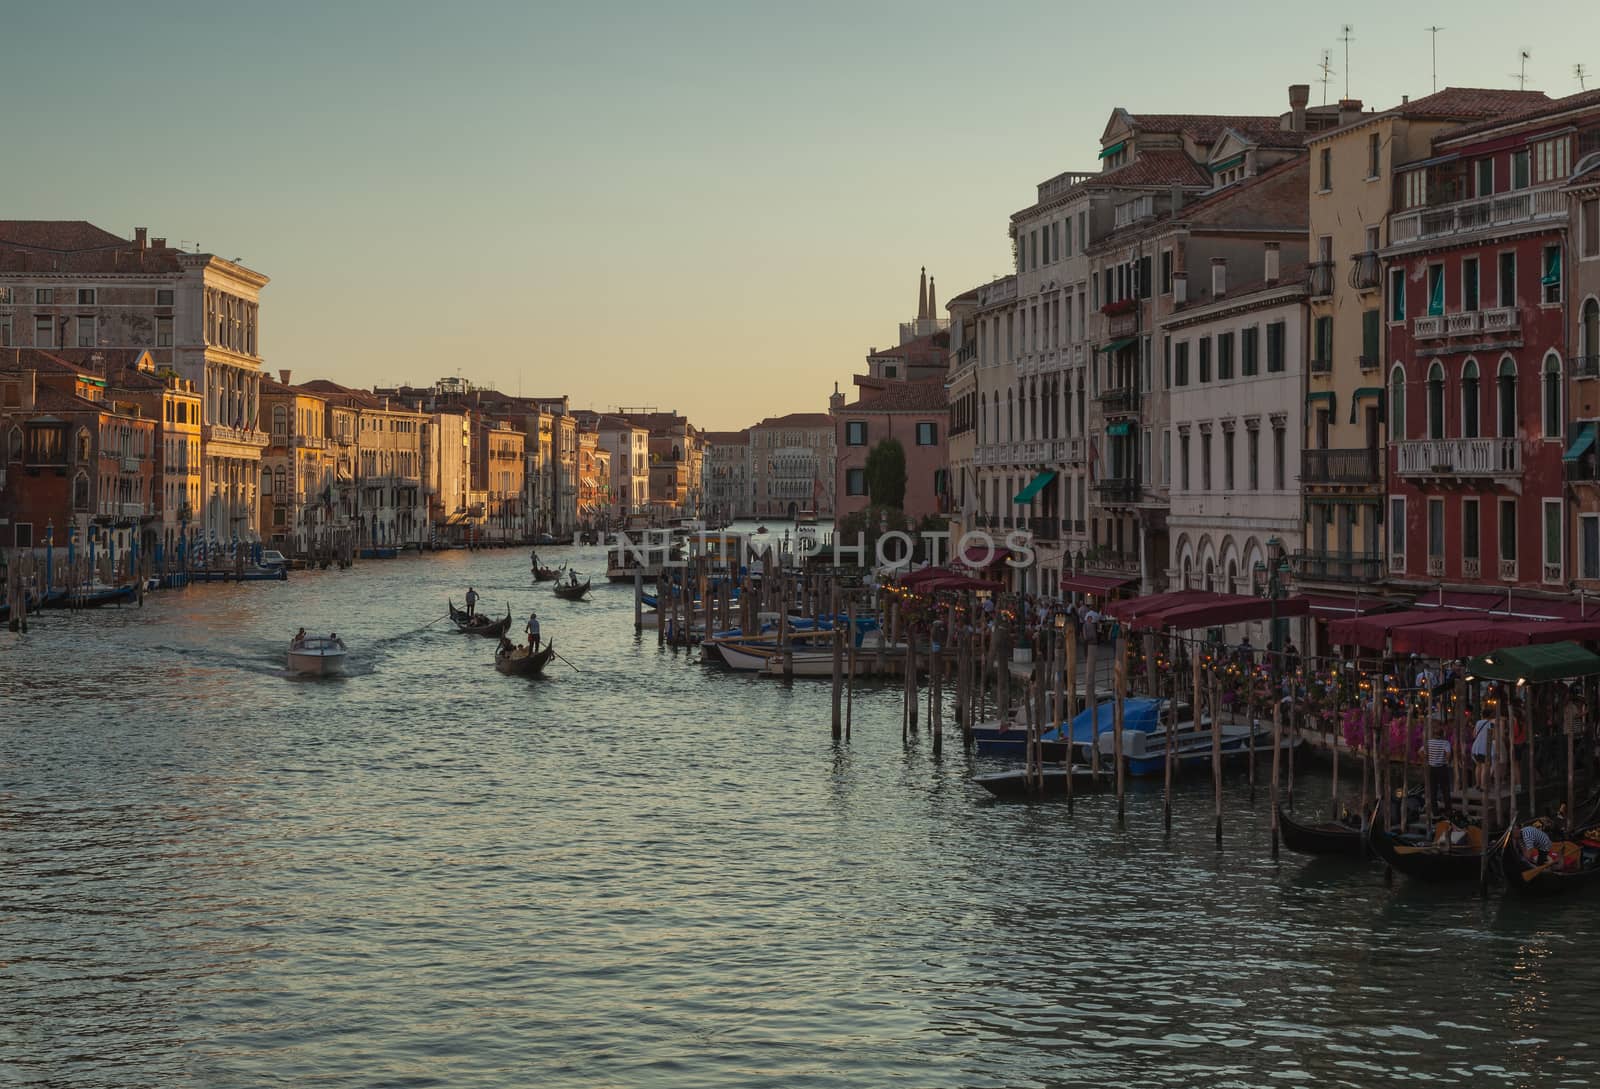 Evening image of the Canale Grande which is the main waterway in Venice,Italy.